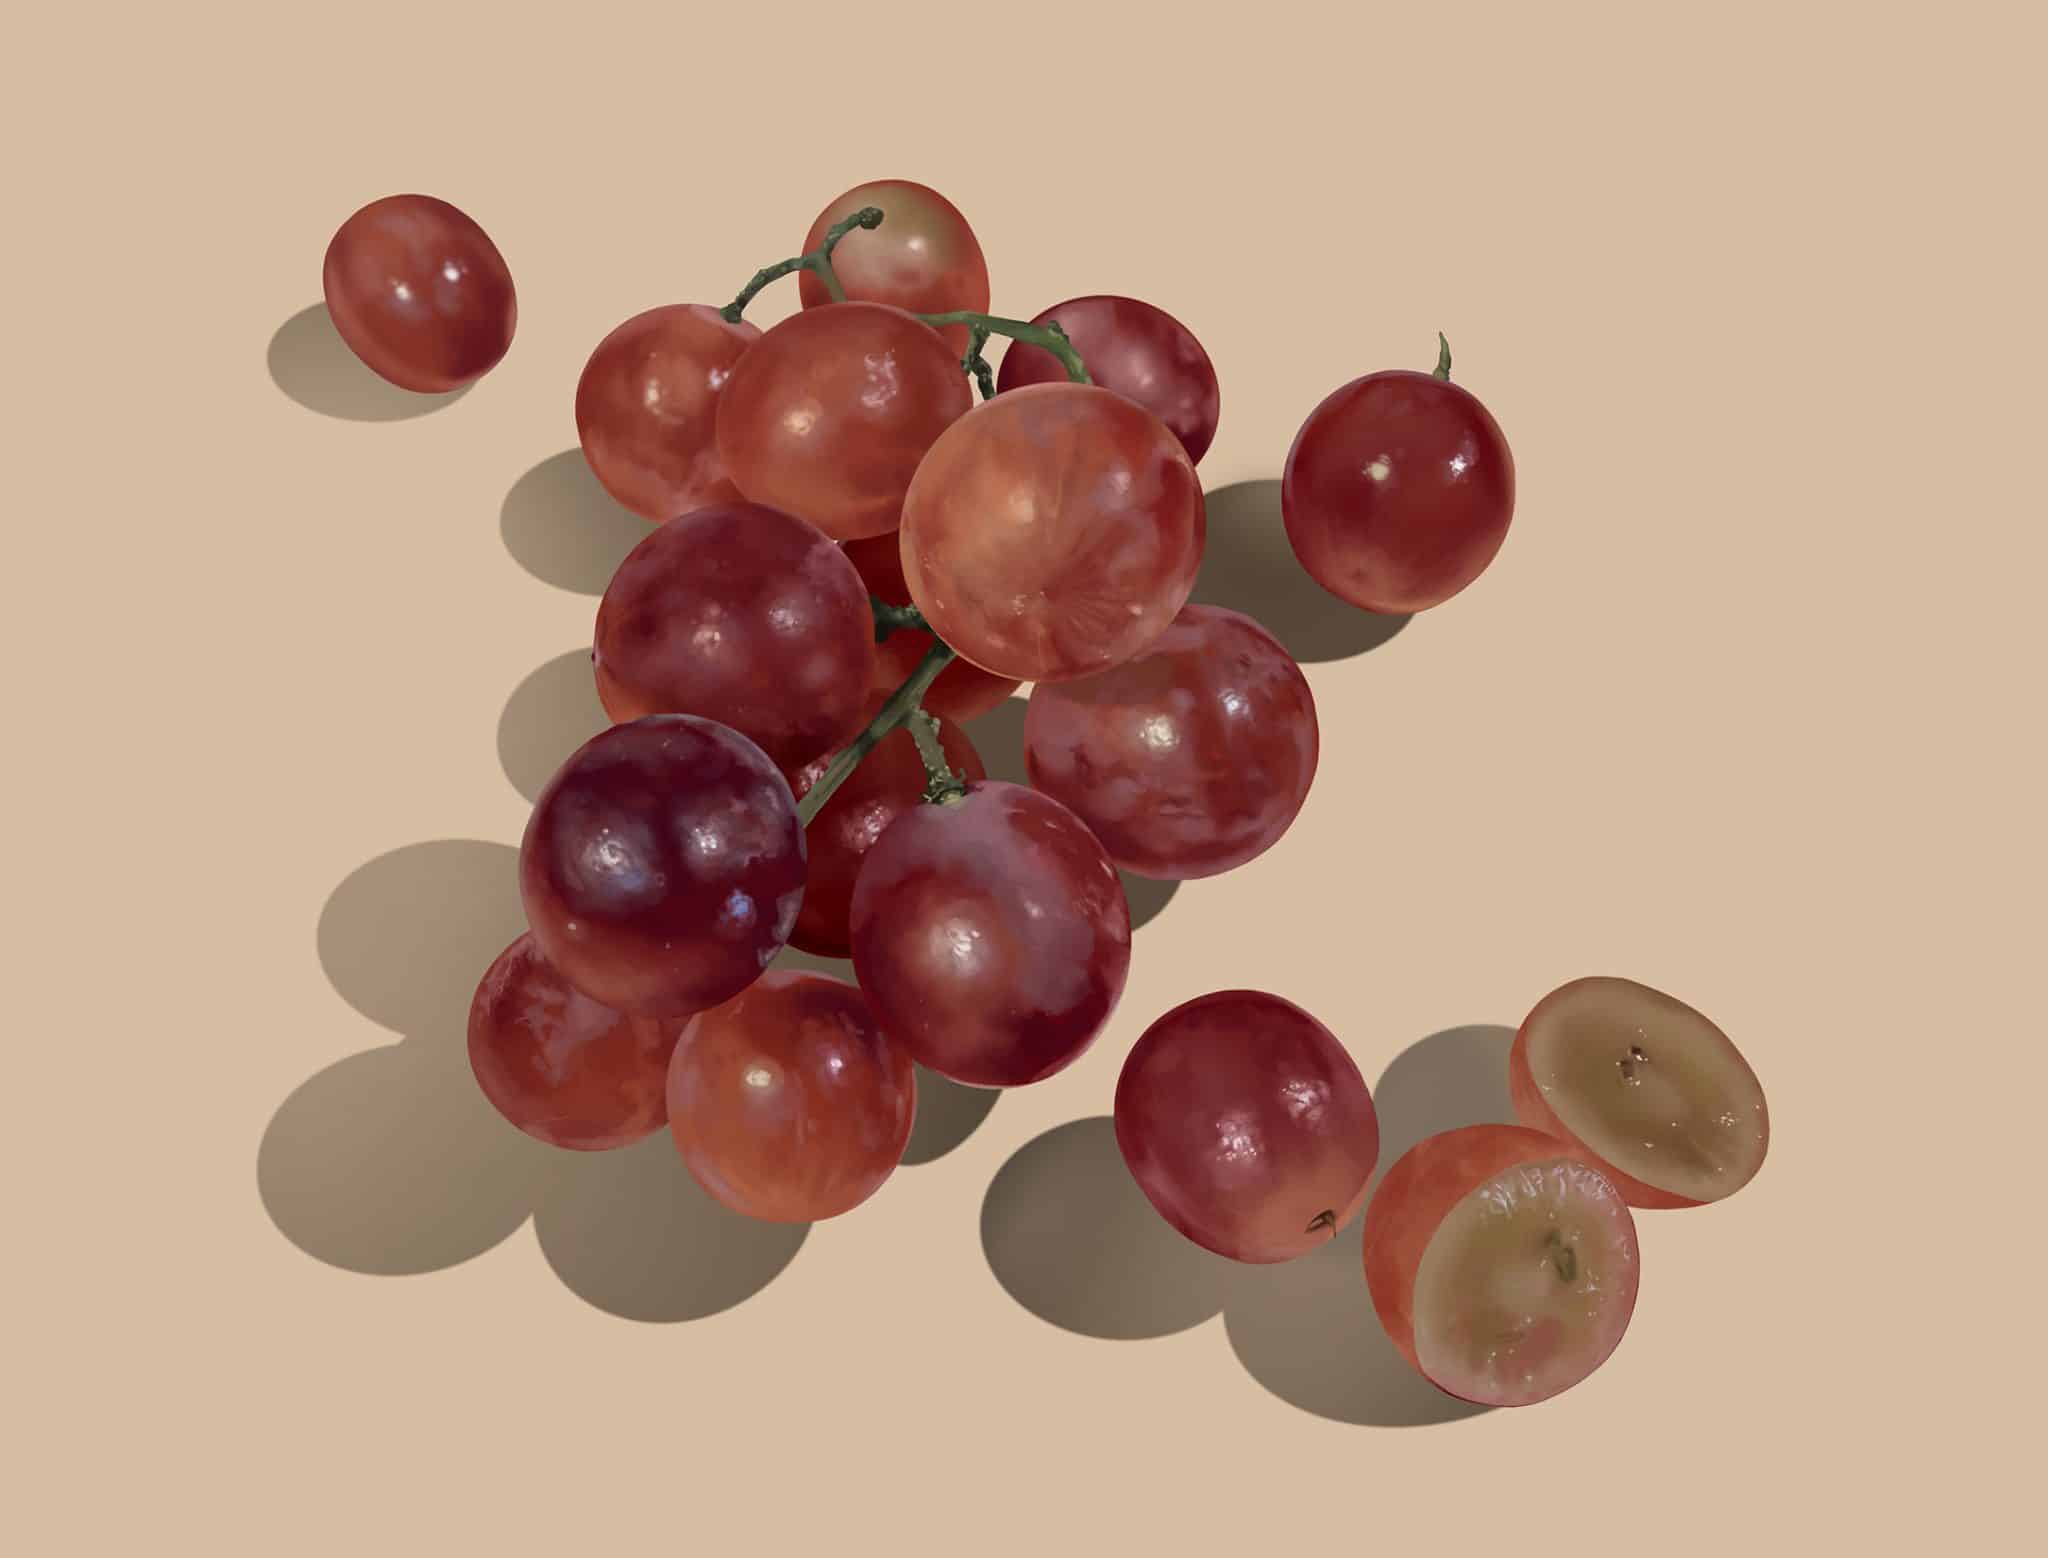 How to Sketch a Grapes - YouTube